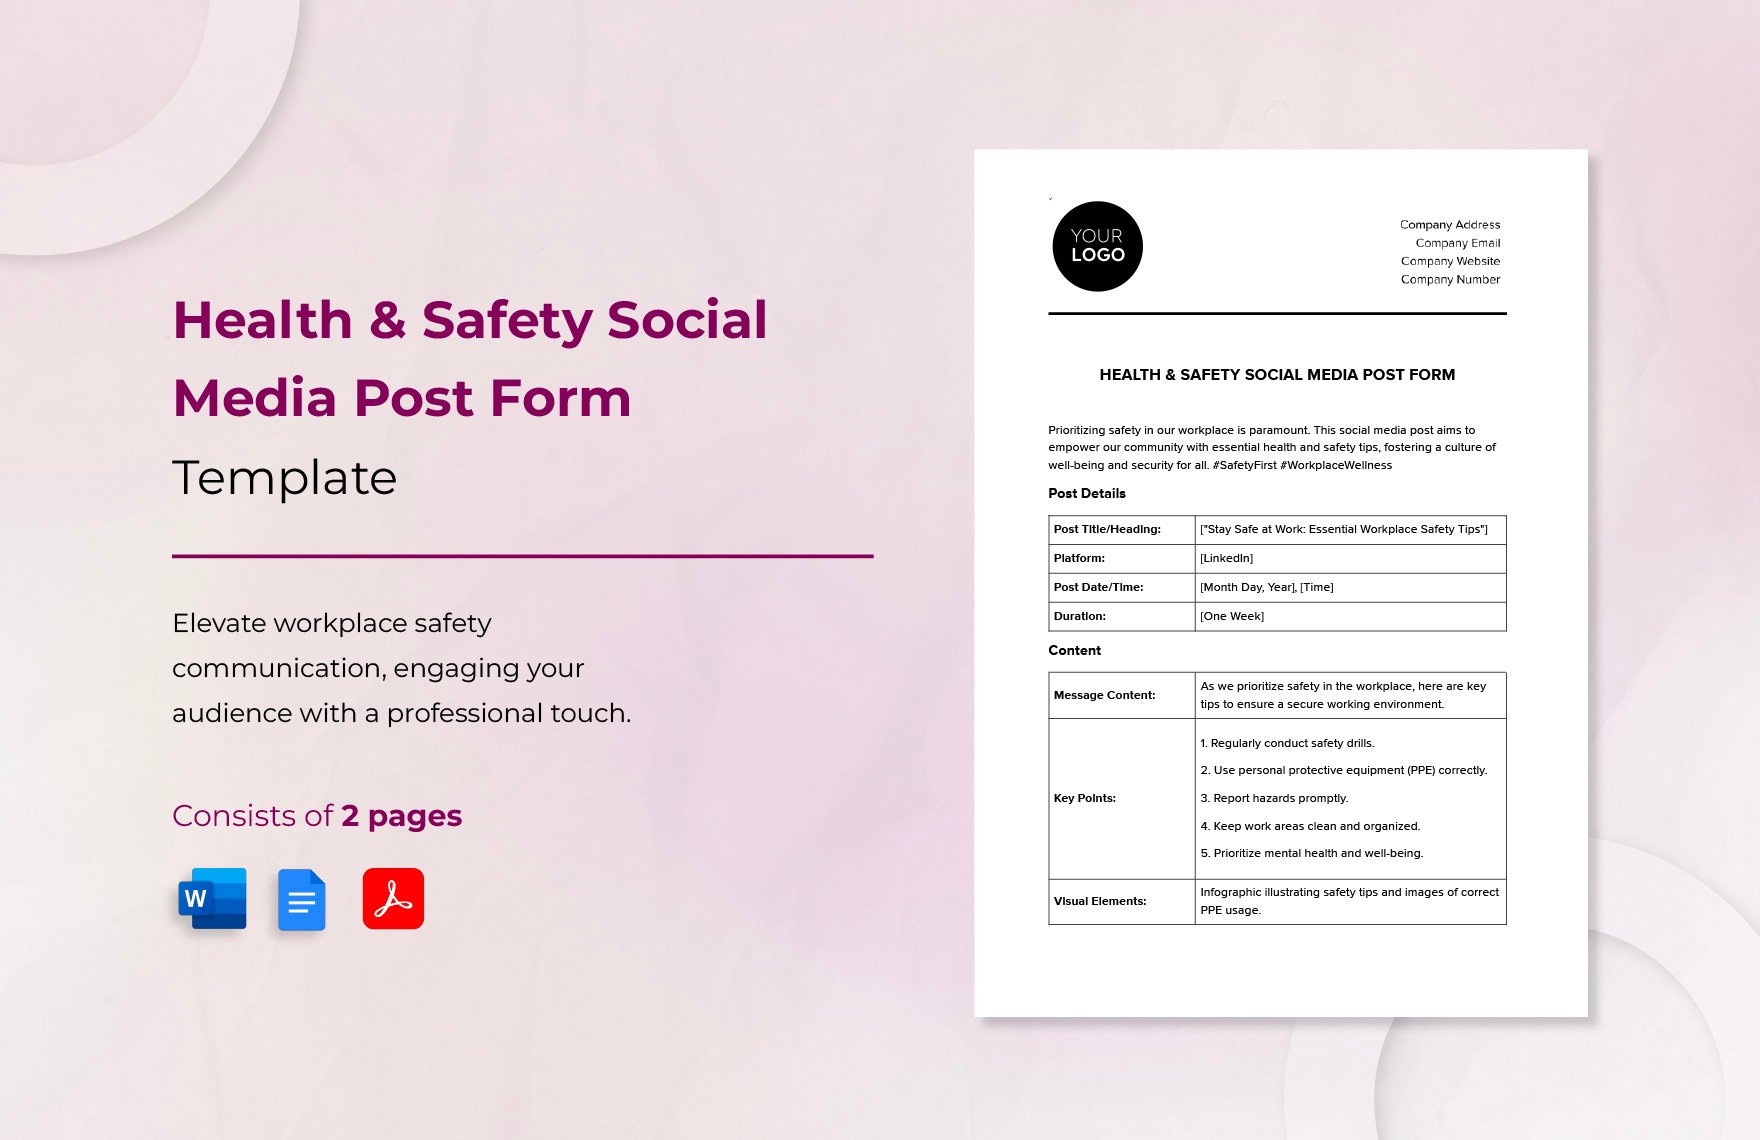 Health & Safety Social Media Post Form Template